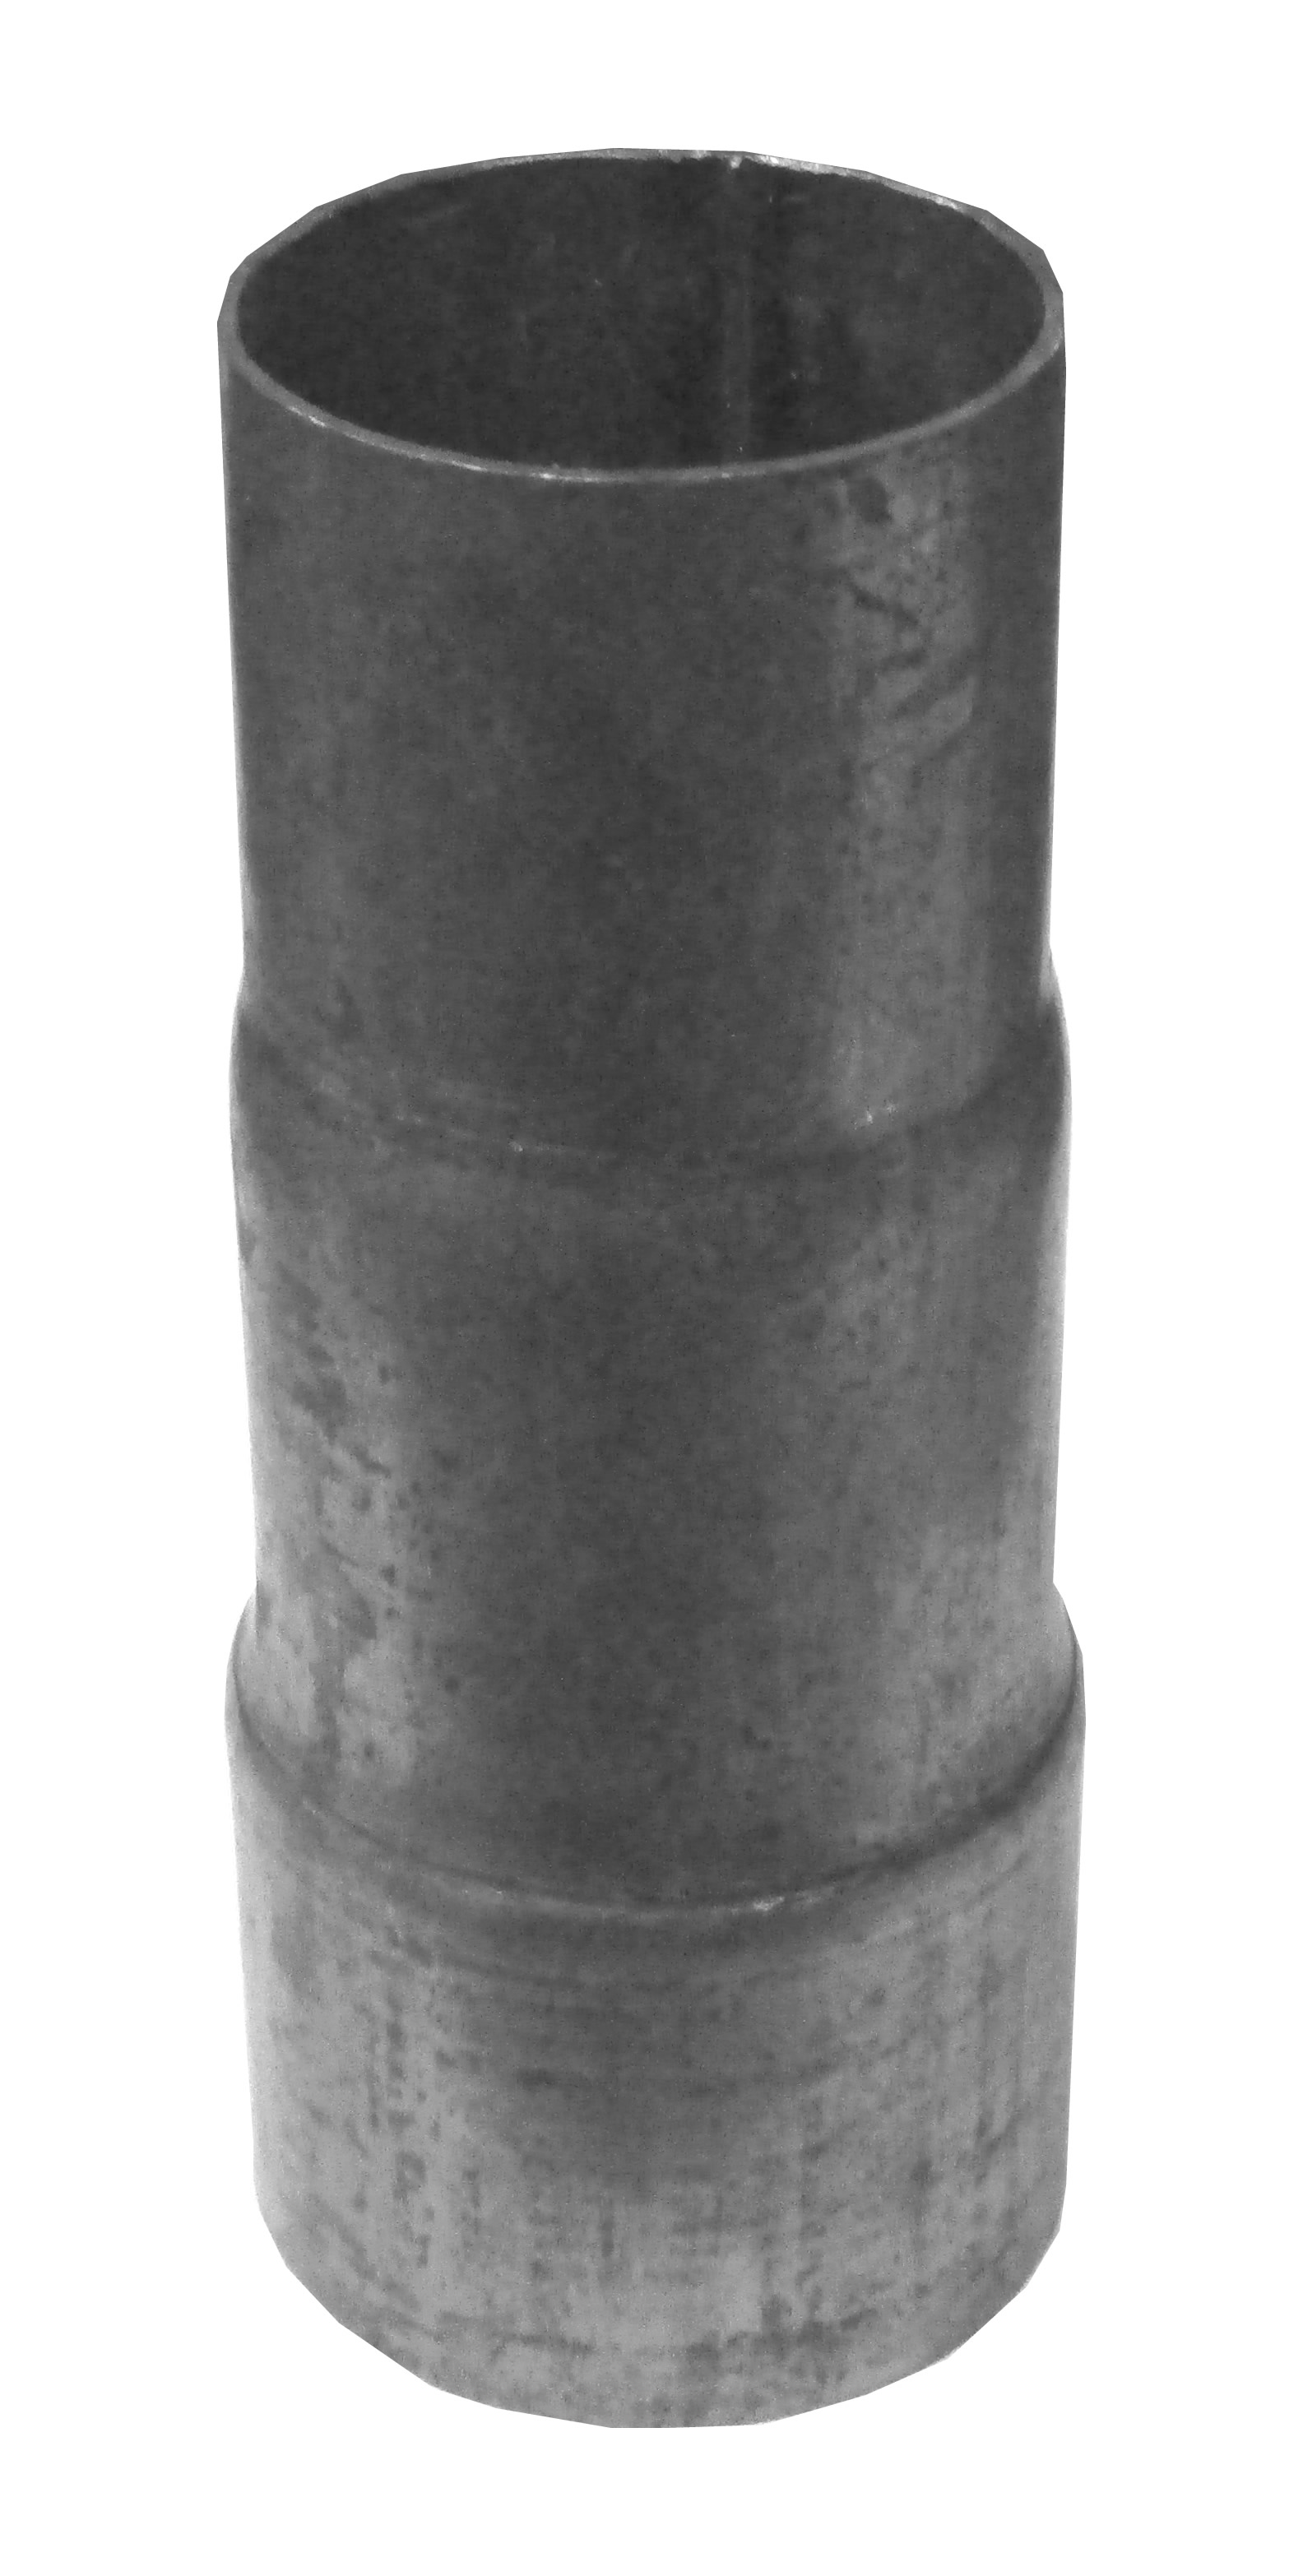 3-STAGE STEEL EXHAUST REDUCER ADAPTER SLEEVE JOINING JOINER CONNECTOR